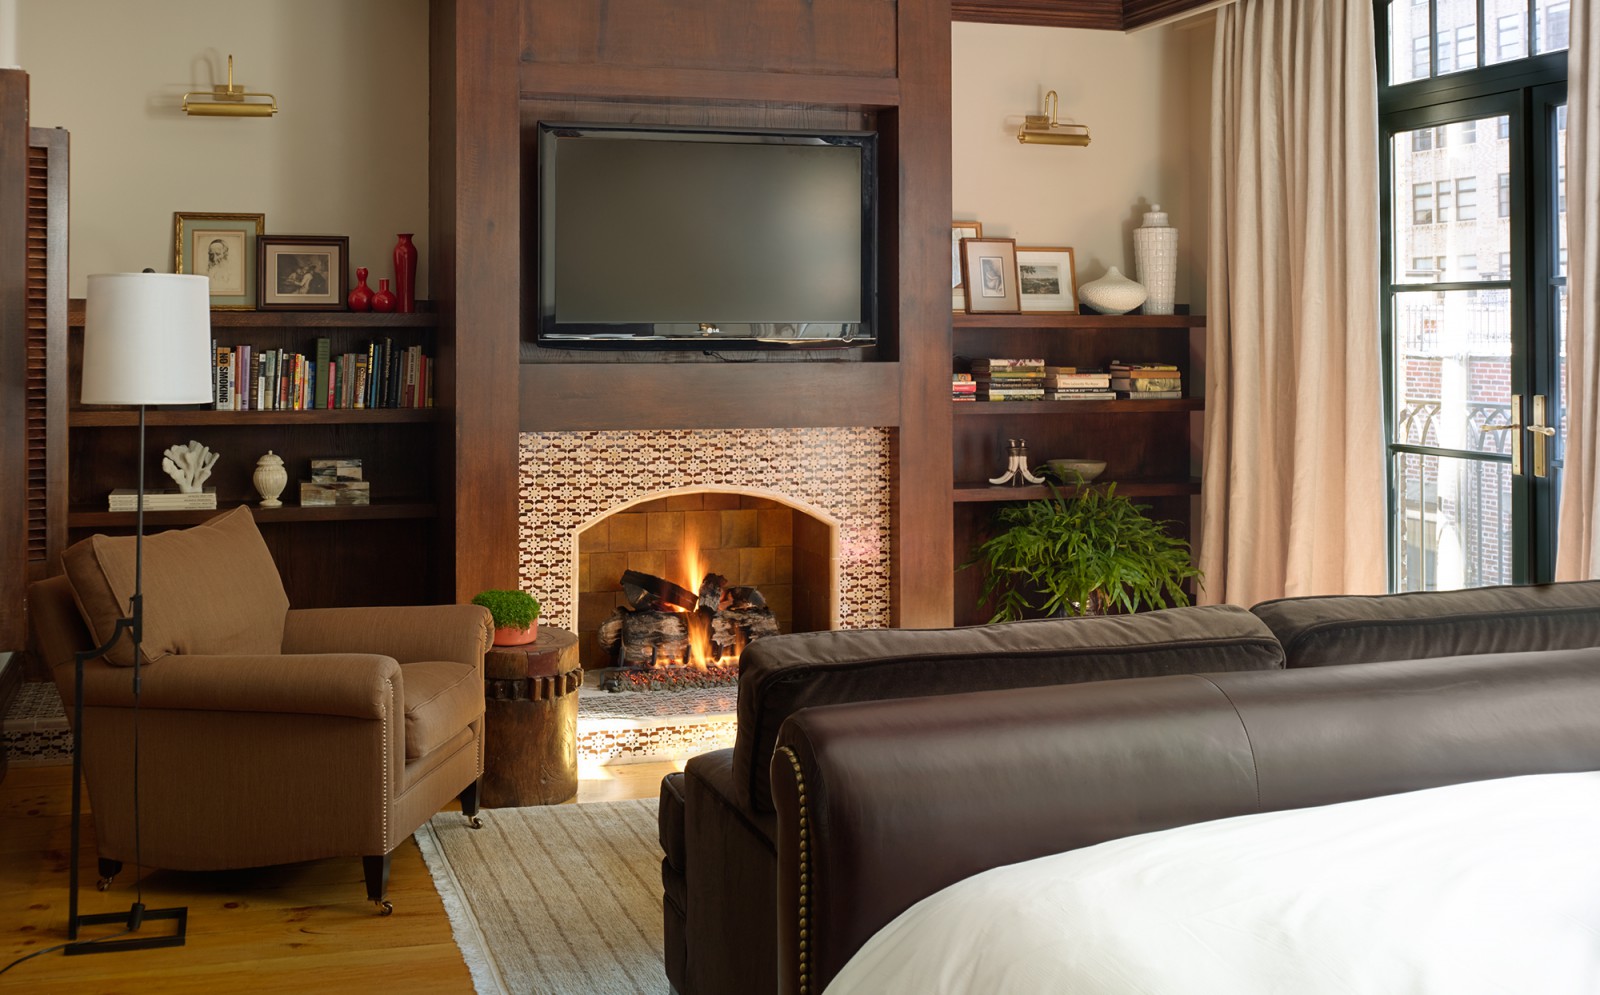 Detail of the bedroom fireplace and seating area in the N. Moore Penthouse at the Greenwich Hotel